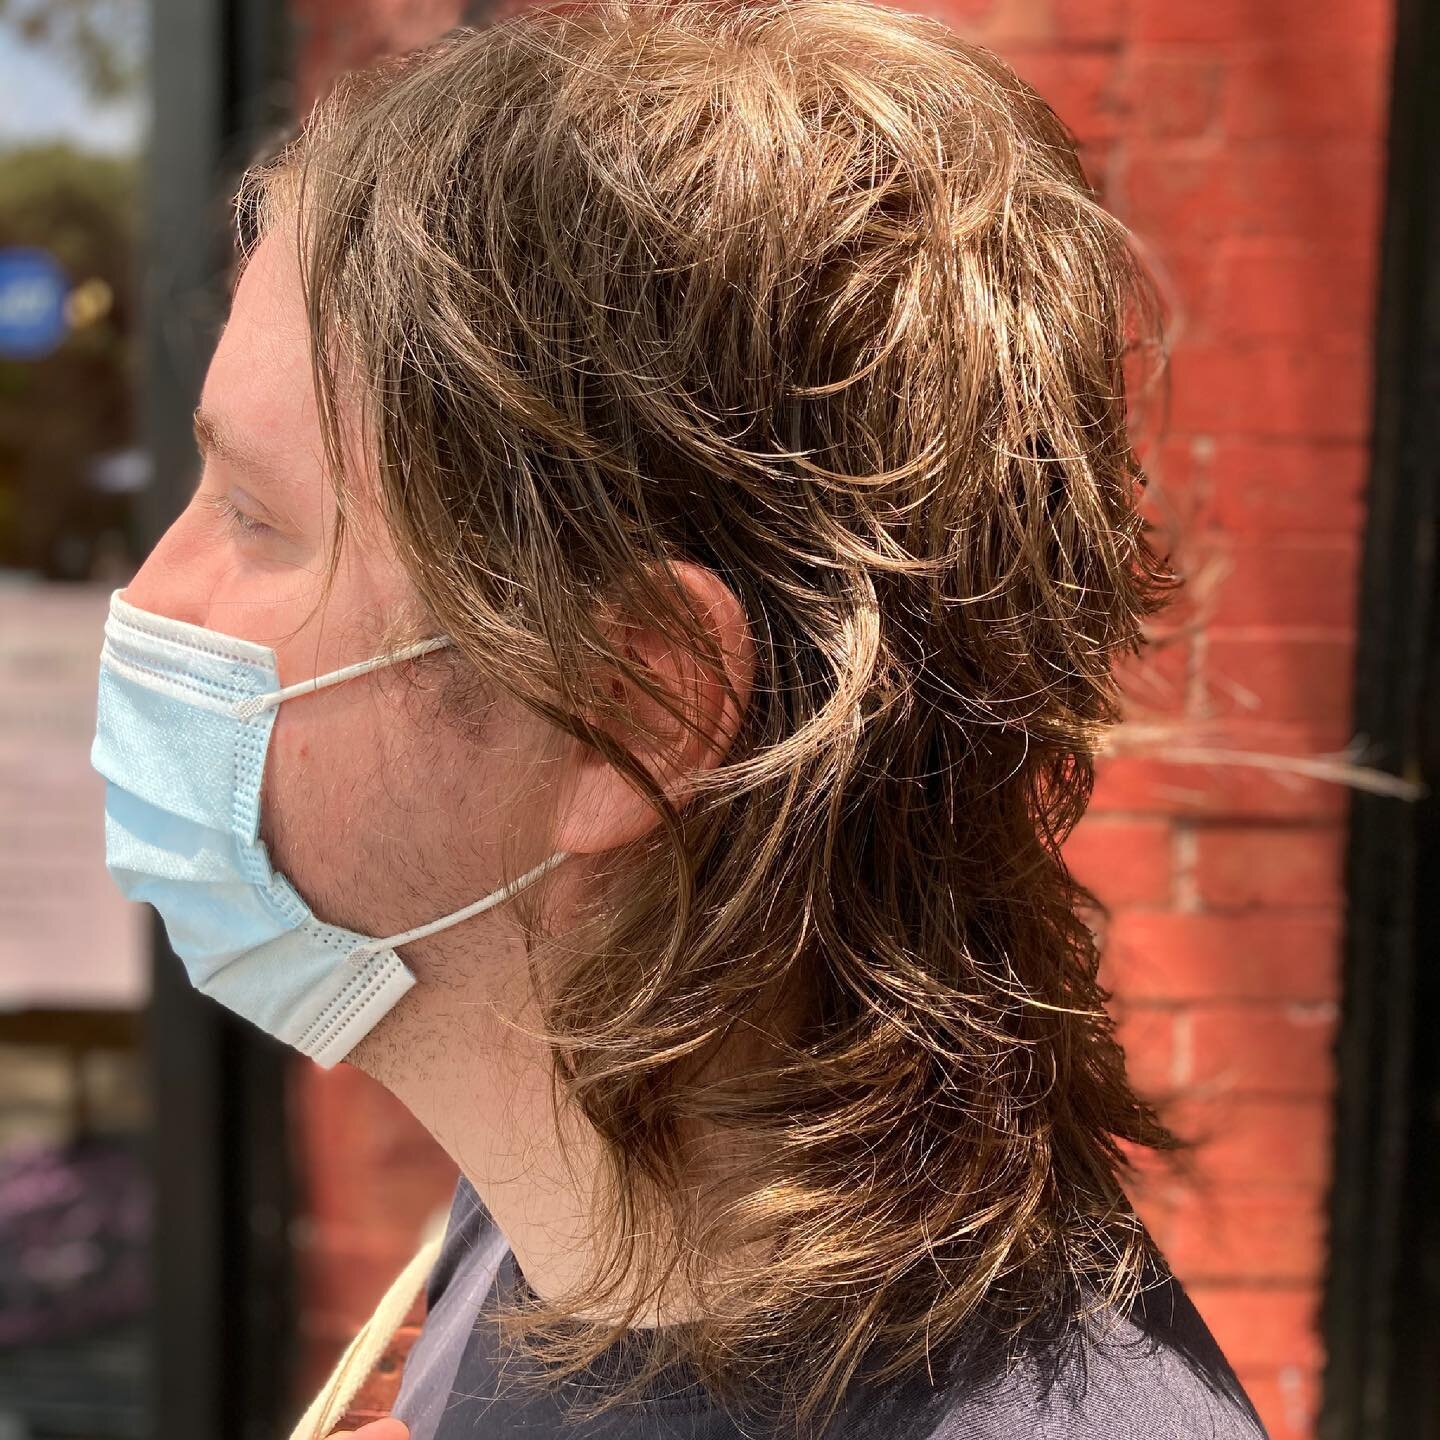 ✂️ Low-maintenance shaggy layers ✂️
Cut by @caro_rama , who specializes in low maintenance haircuts that grow out beautifully ✨

Link in bio to book! 🤟

🏙🏙🏙🏙🏙🏙🏙🏙🏙

#parkslope #parkslopebrooklyn #medusasalonny #shaghaircut 
#mullet #mulletha